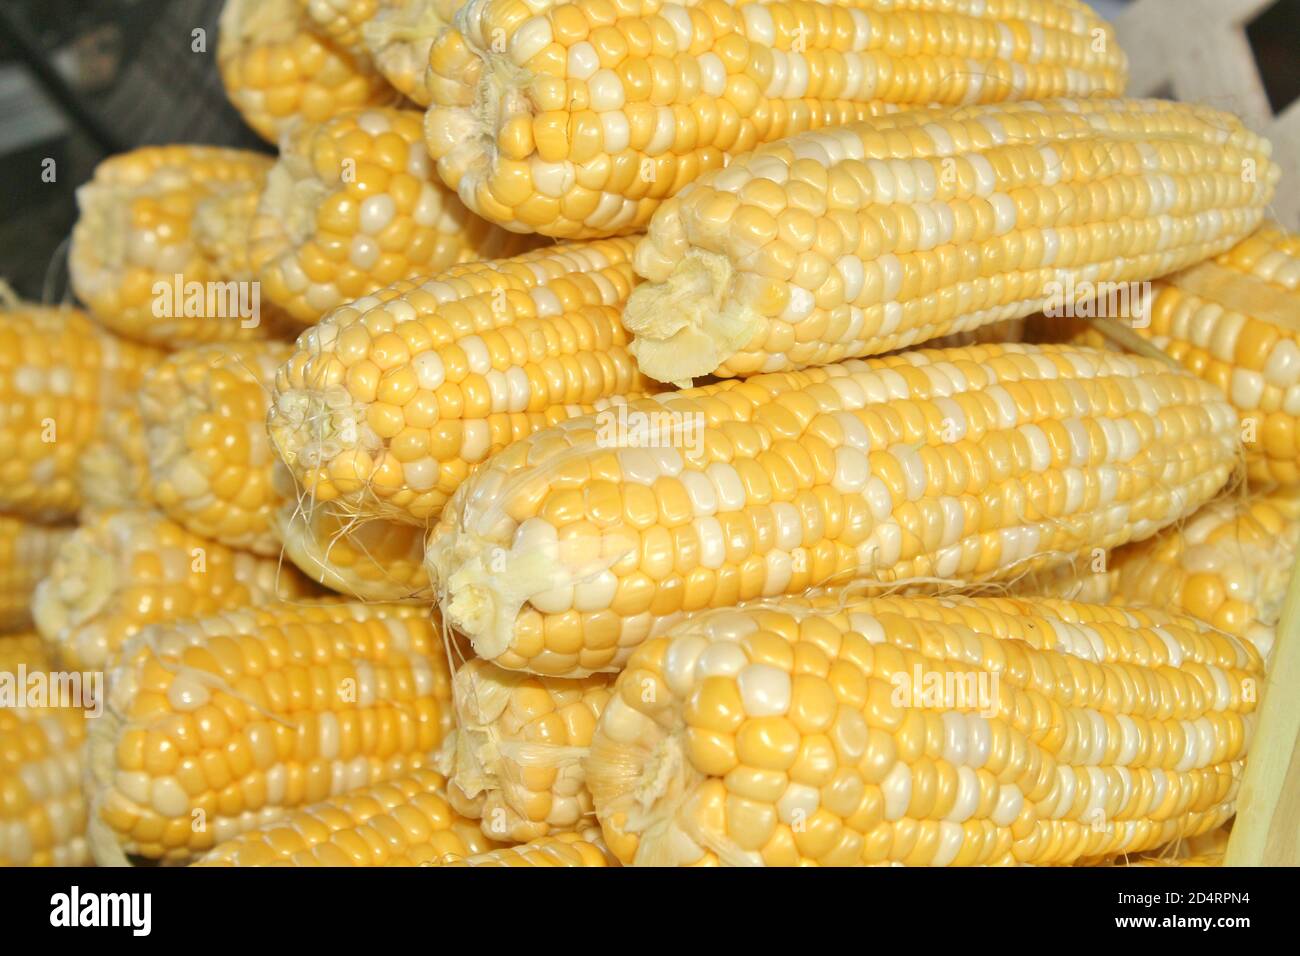 Ears of corn shucked and cleaned Stock Photo